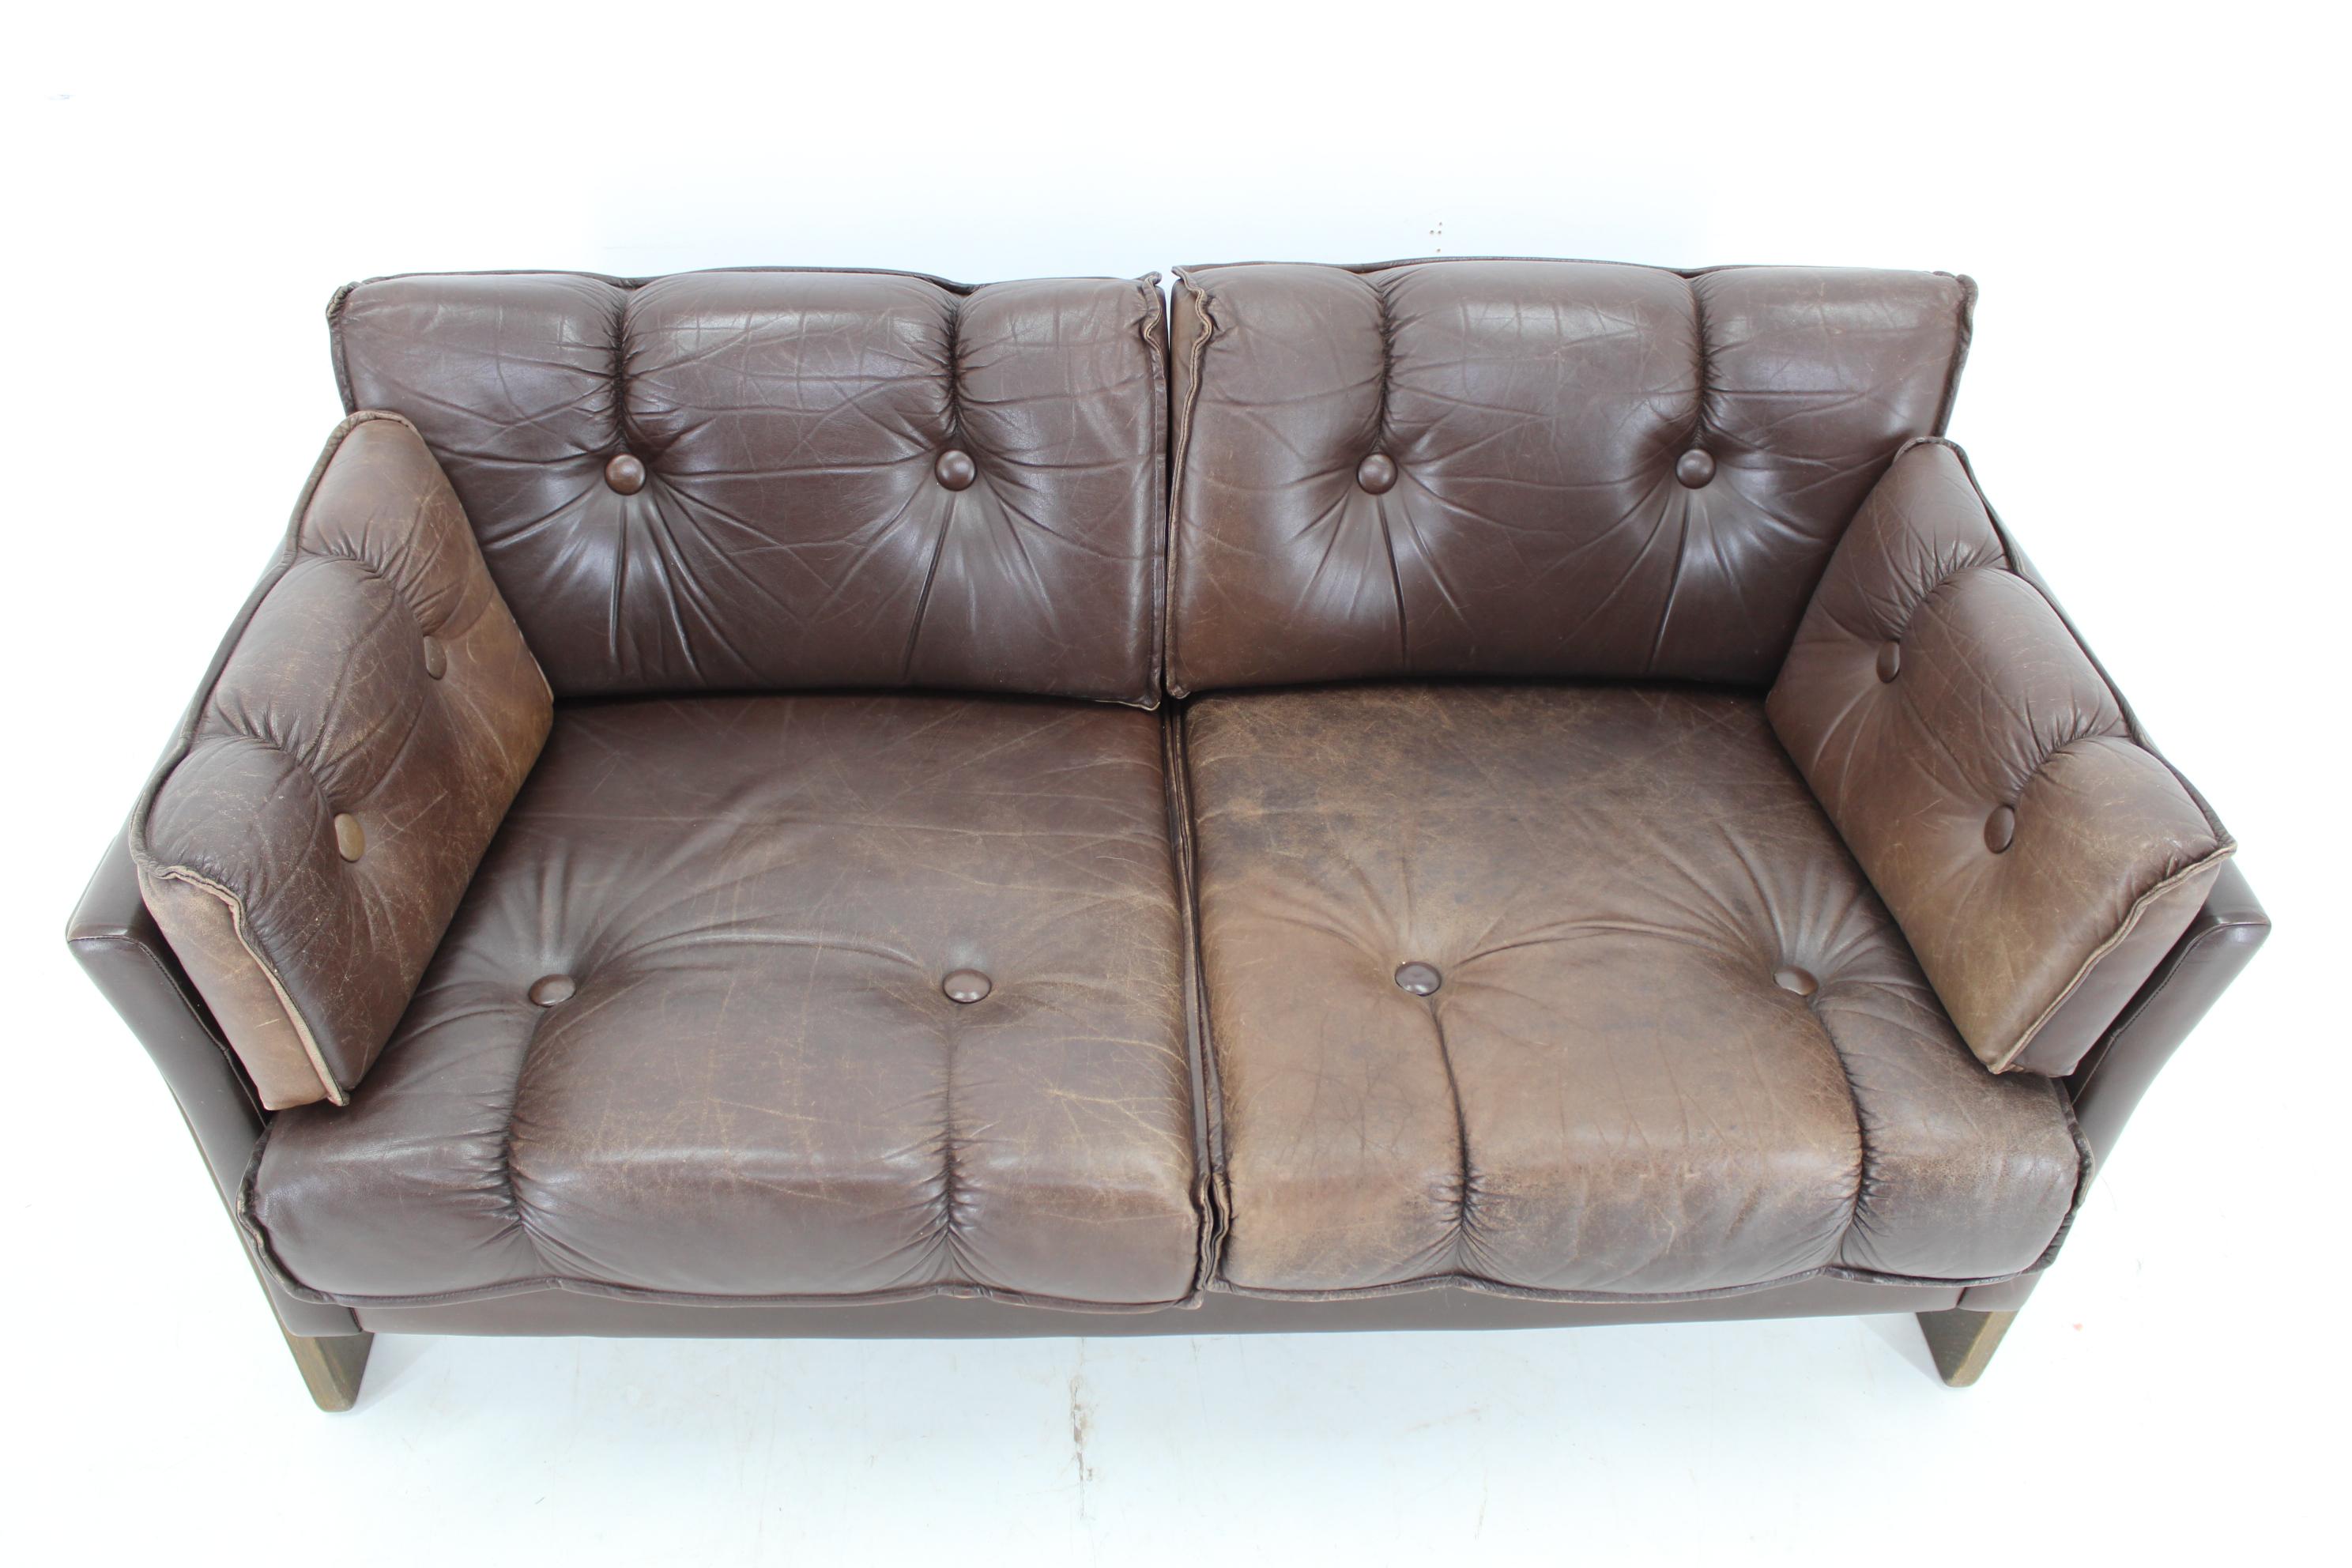 1970s Brown Leather 2-Seater Sofa, Denmark For Sale 3